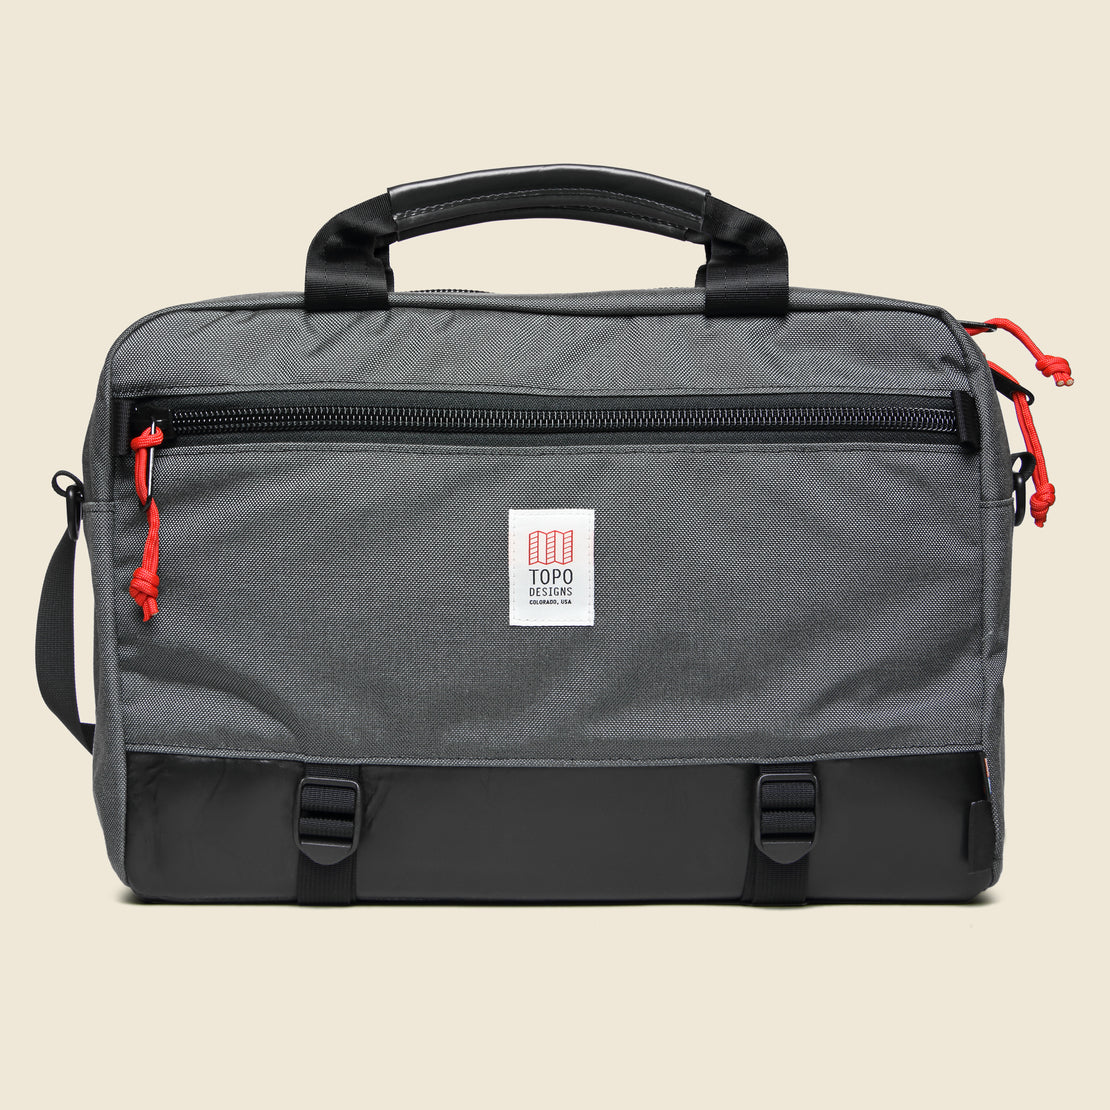 Topo Designs Commuter Briefcase - Charcoal/Black Leather